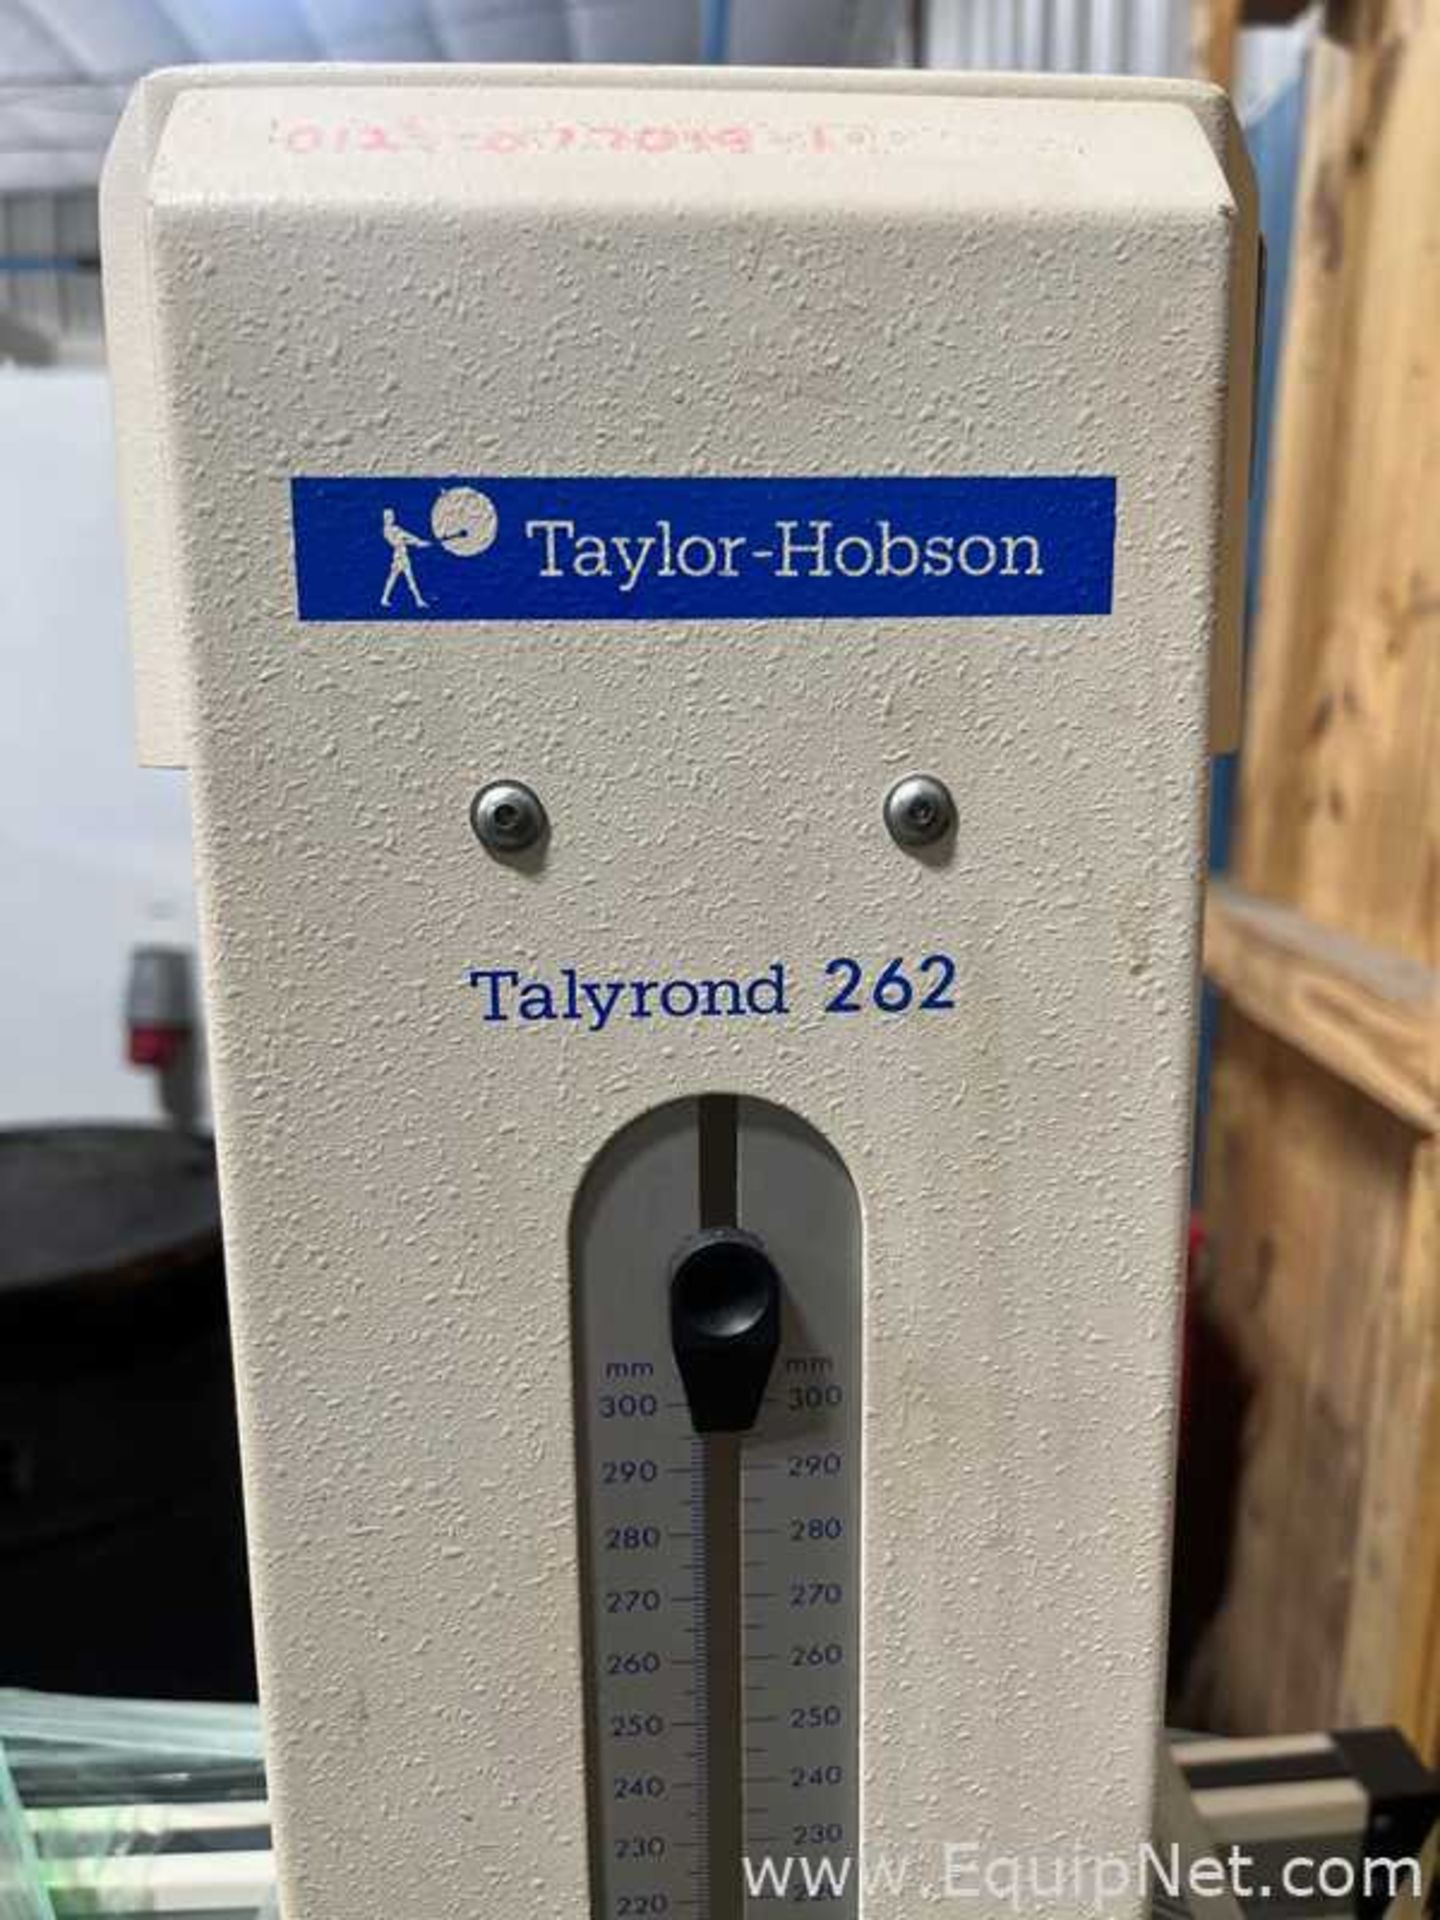 Taylor Hobson Talyrond 262 Roundness And Cylindricity Analyzer - Image 3 of 5